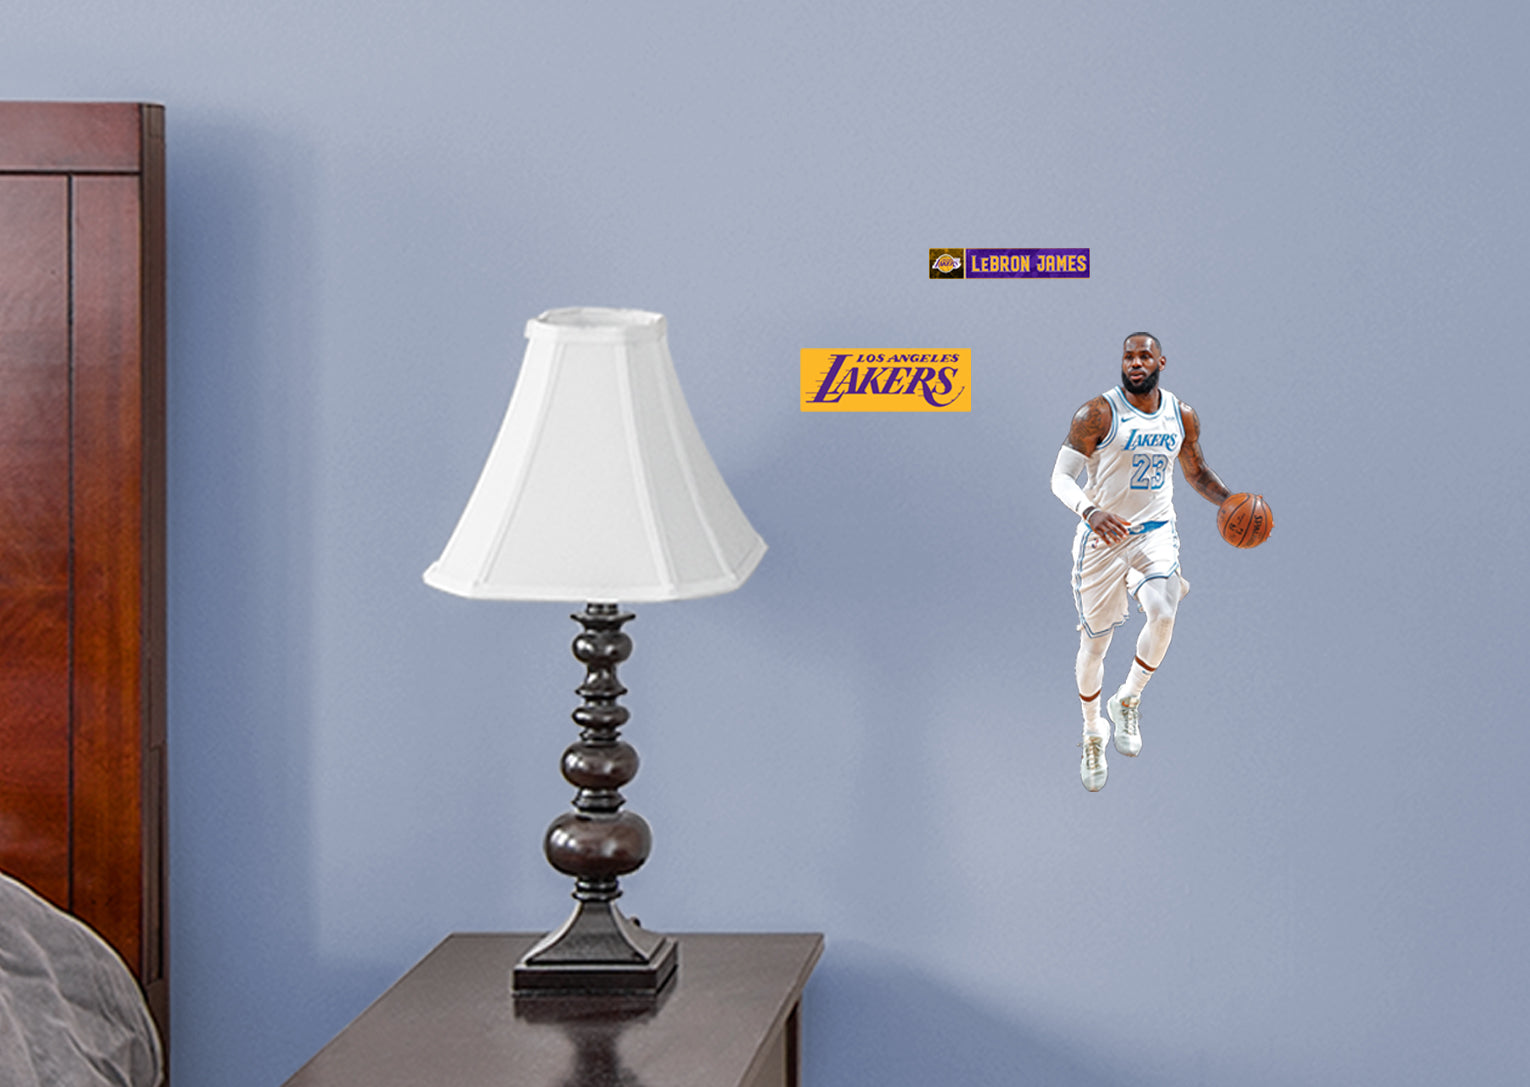 LeBron James 2021 City Jersey for Los Angeles Lakers - Officially Licensed NBA Removable Wall Decal Large by Fathead | Vinyl